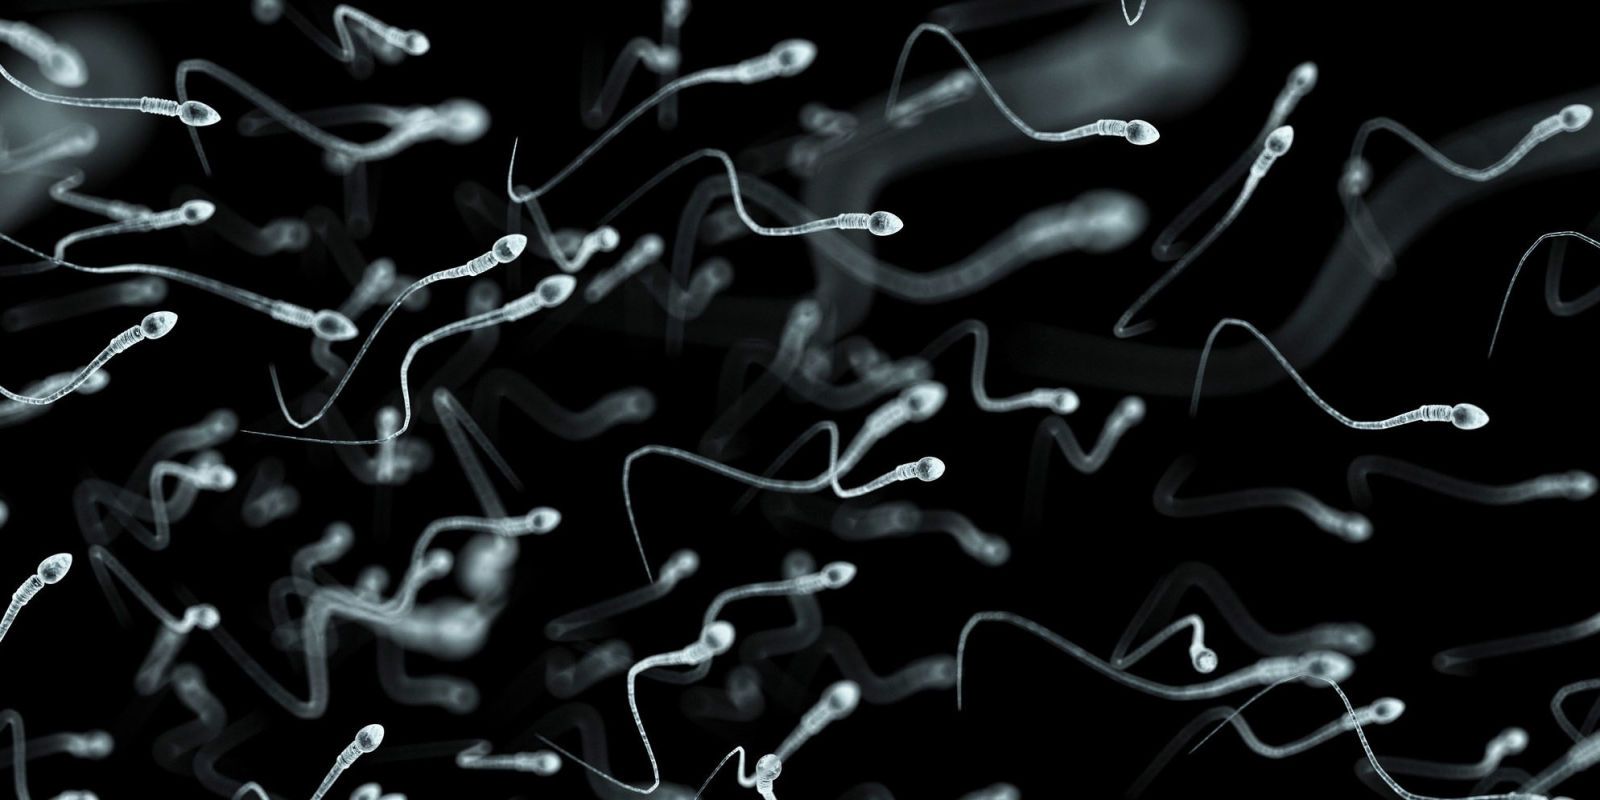 Ed and decrease in sperm